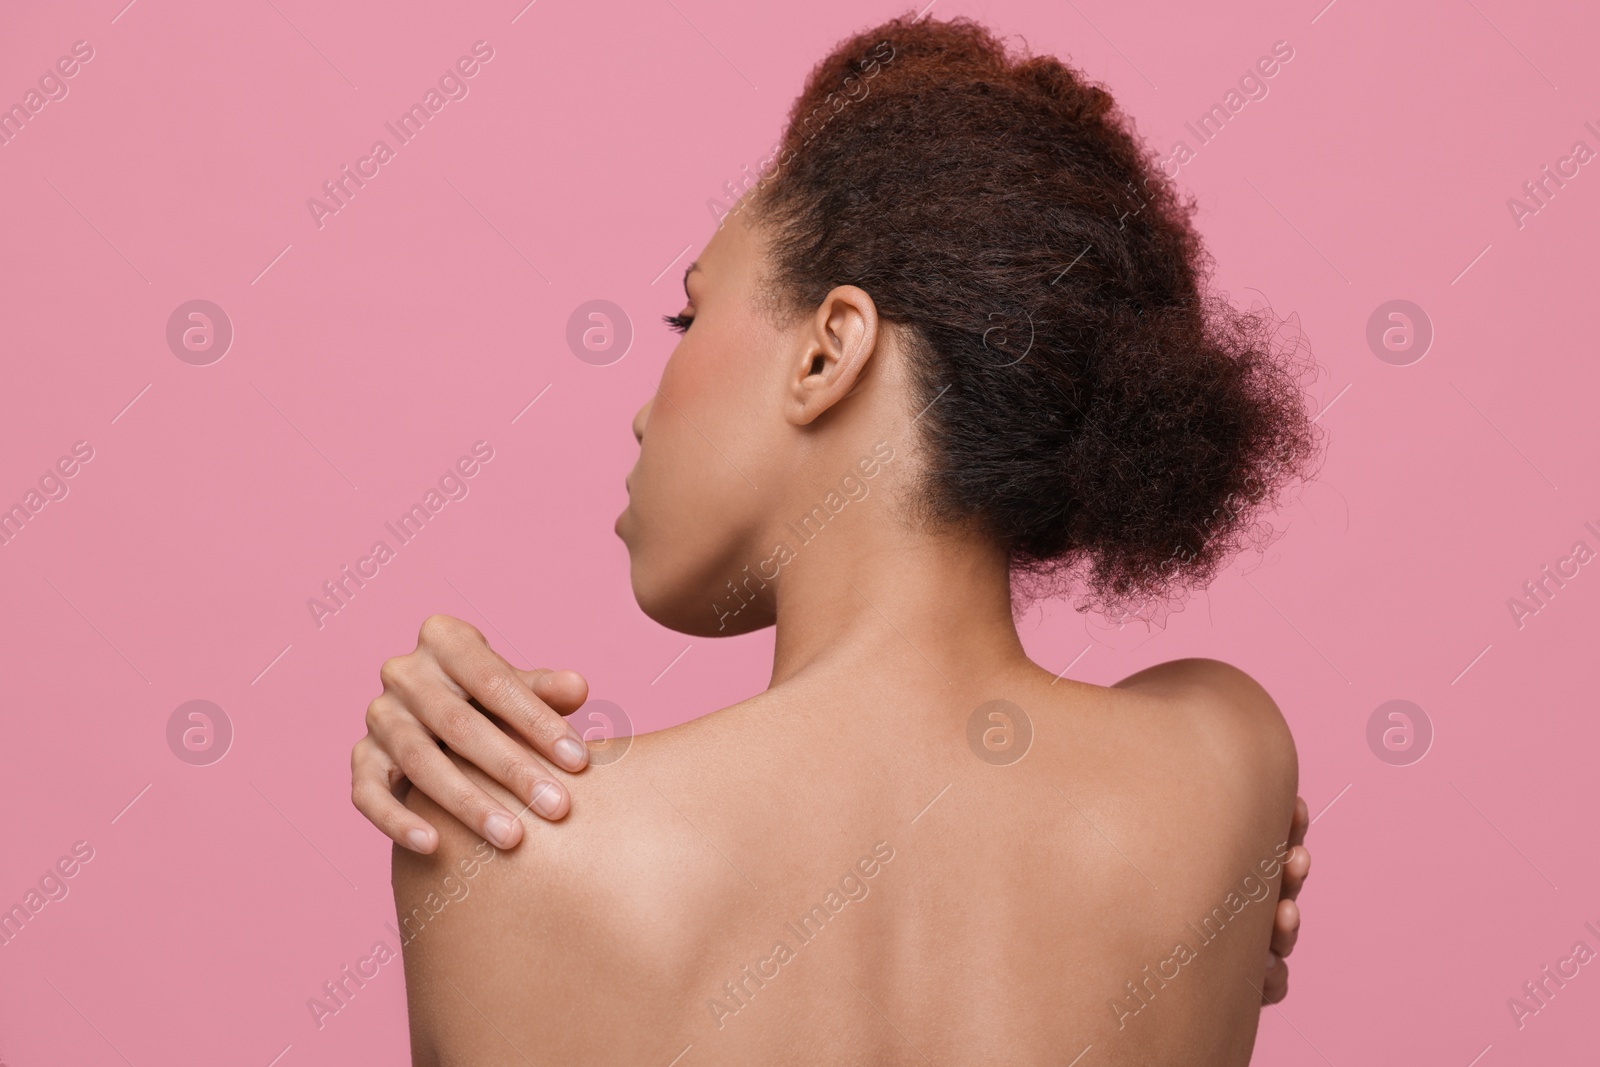 Photo of Beautiful young woman with stylish hairstyle on pink background, back view